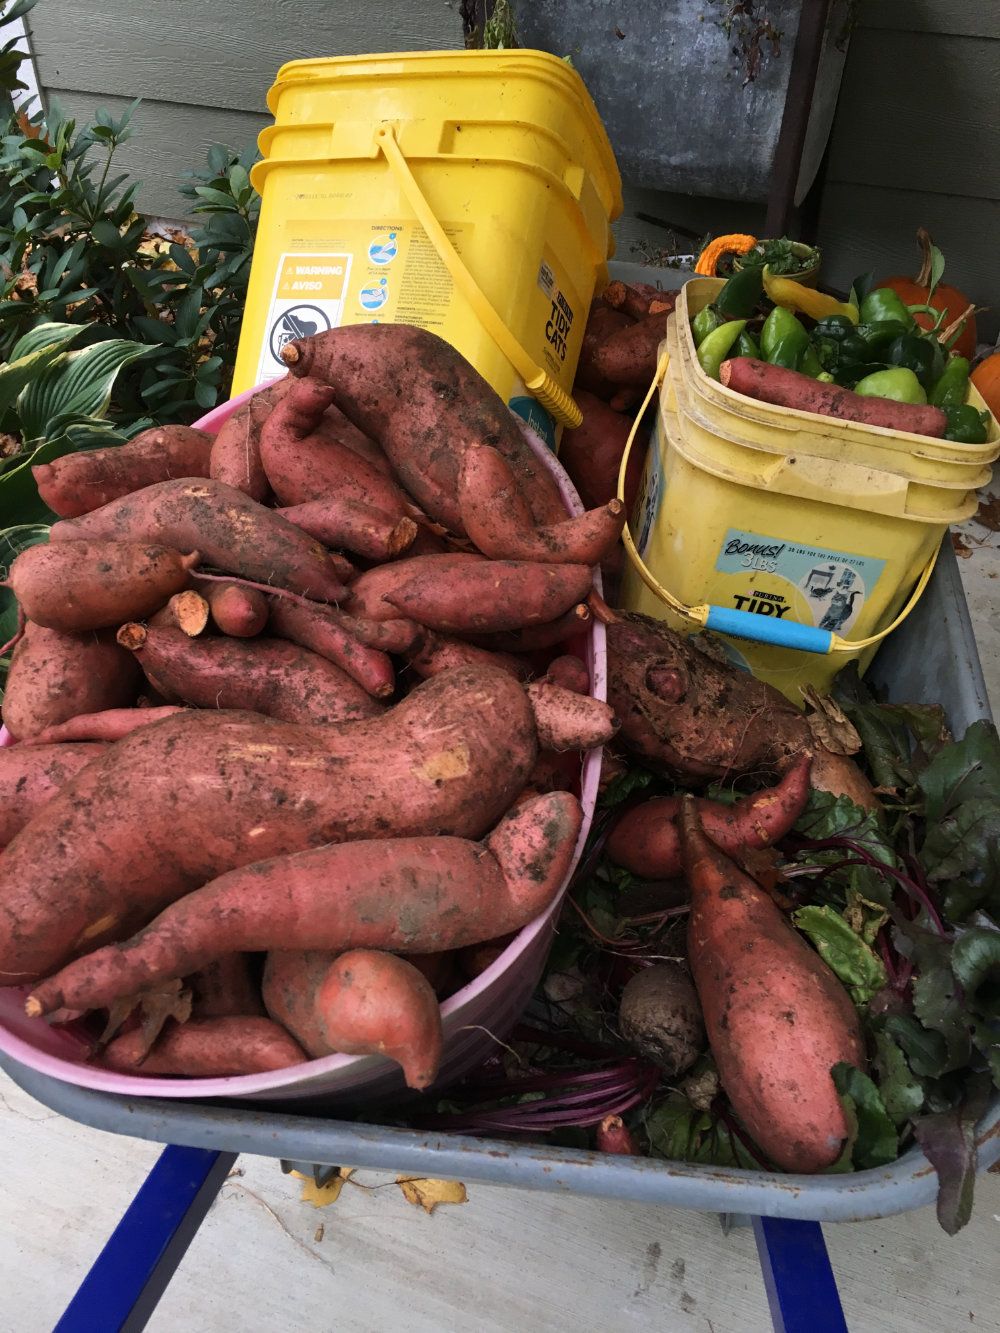 A wheelbarrow full of produce including sweet potatoes and peppers.